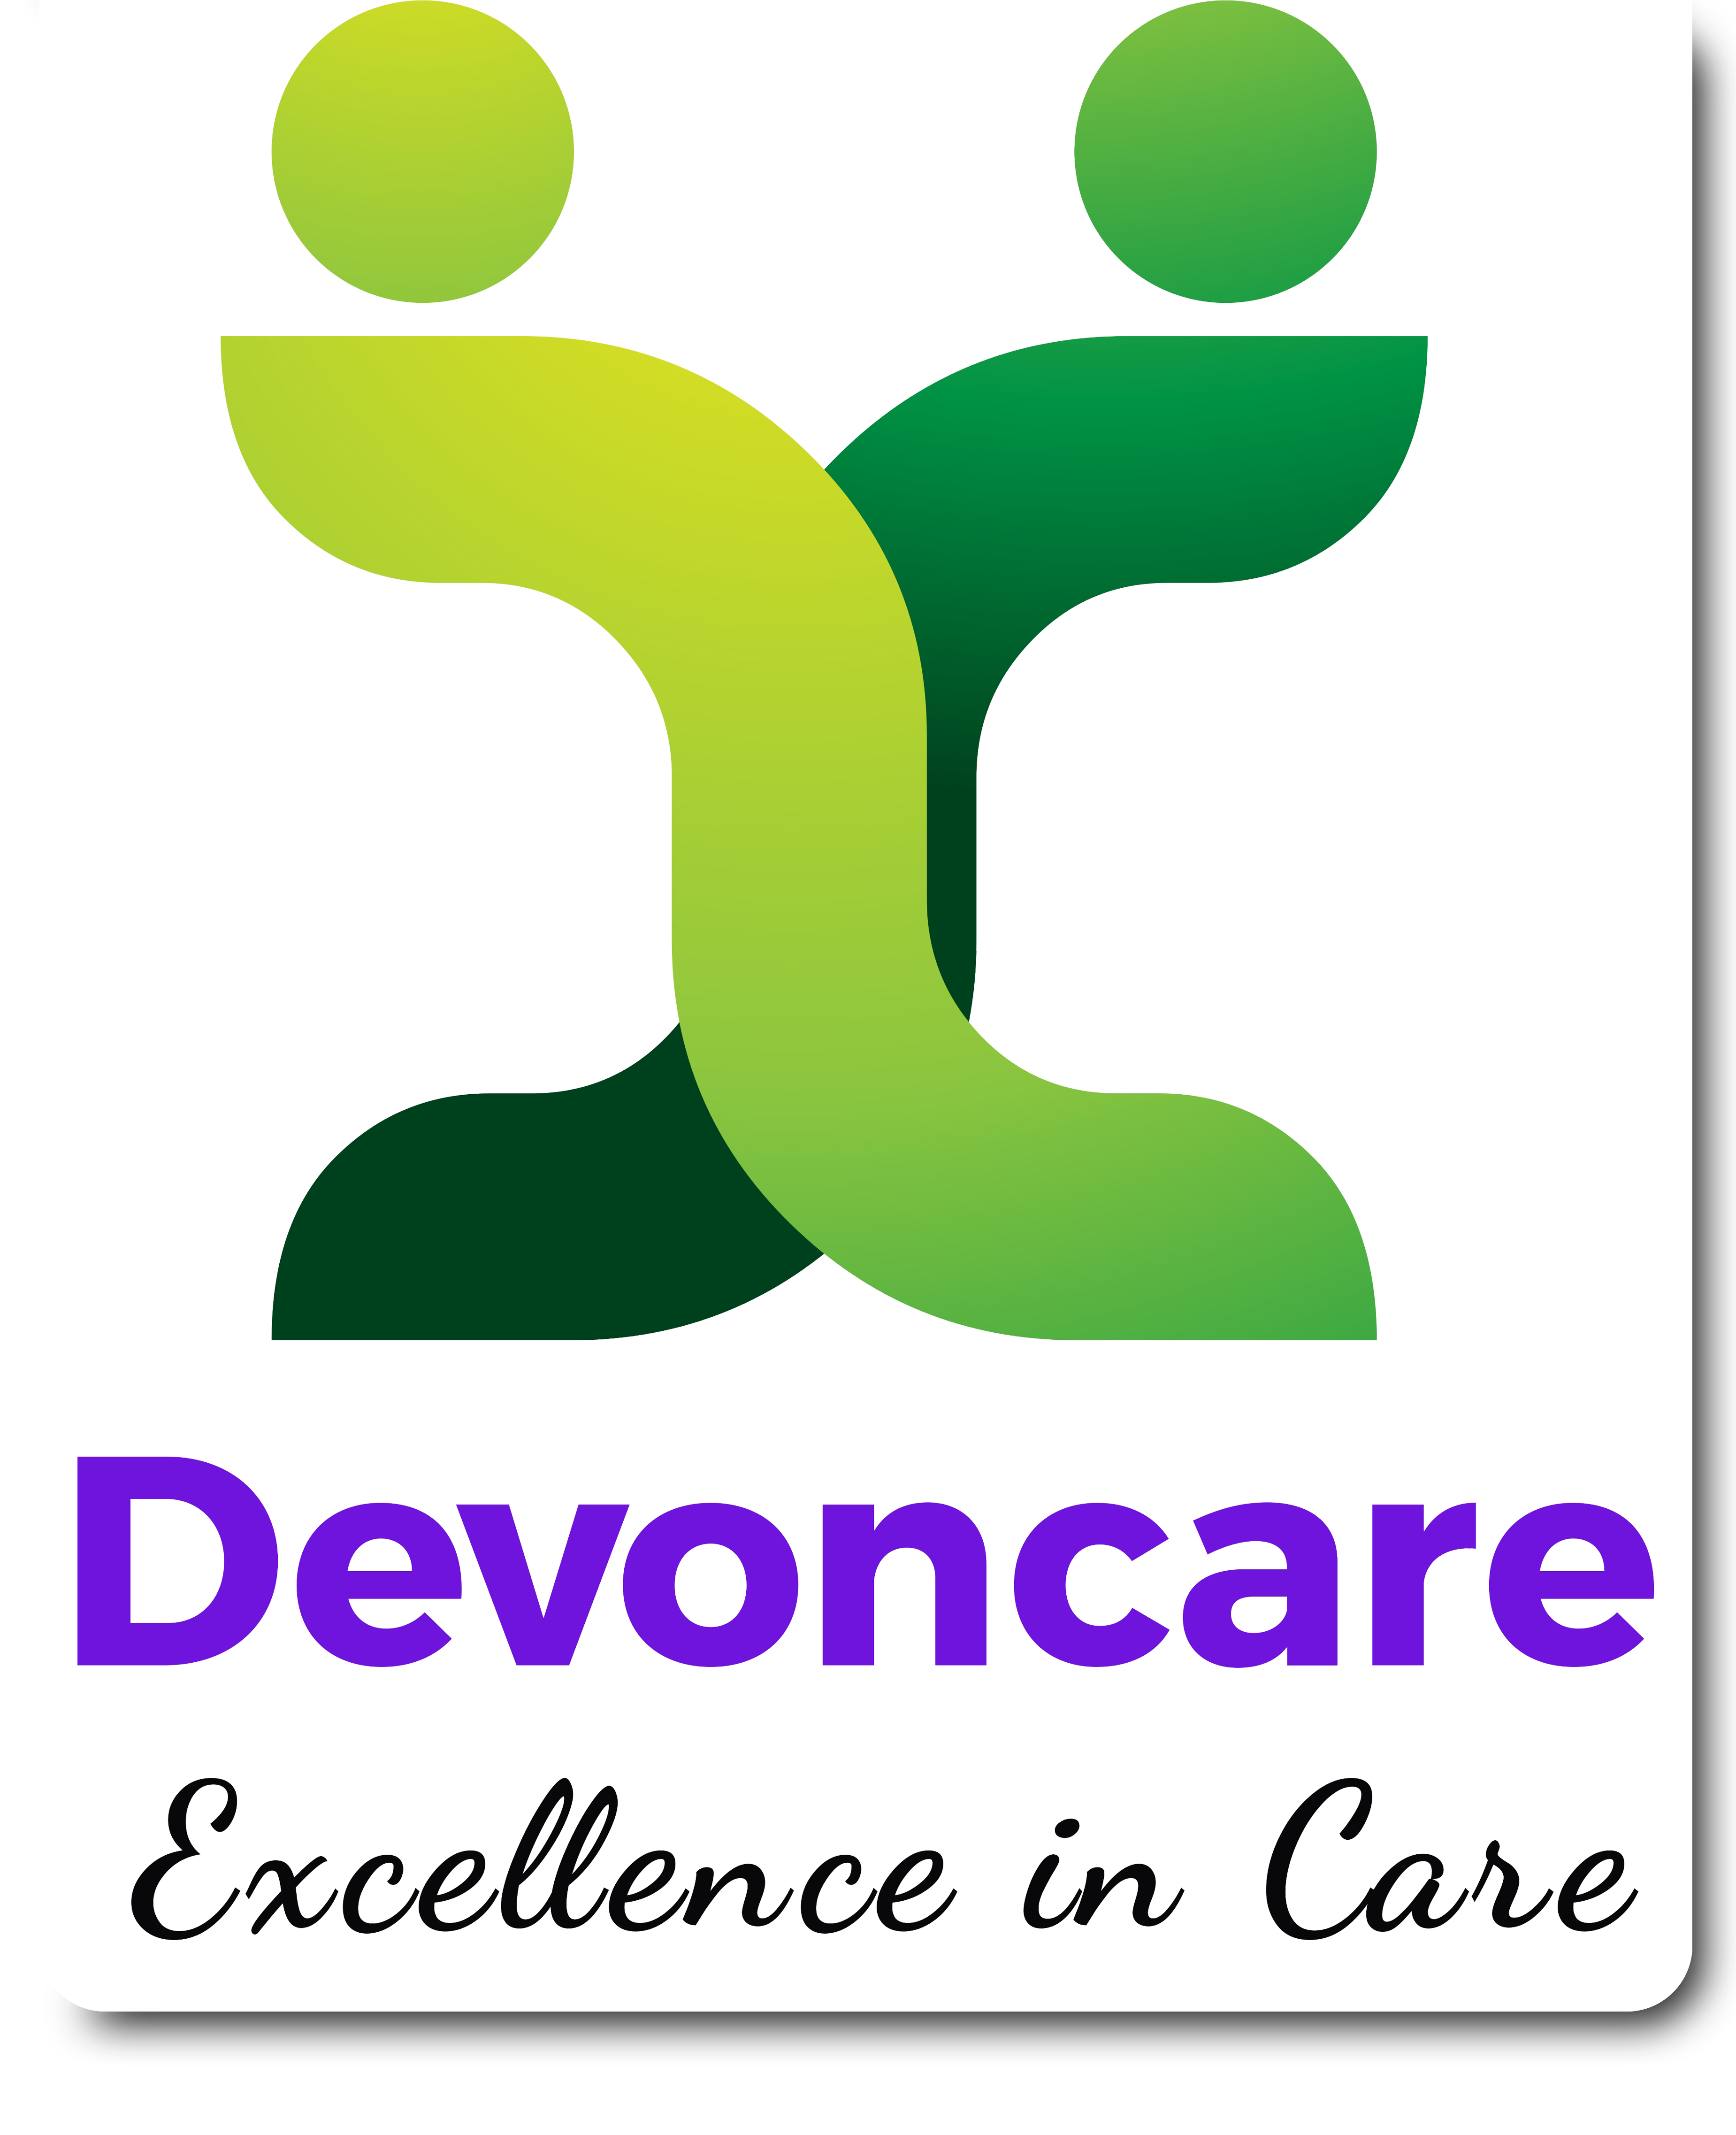 Staying Positive Devoncare